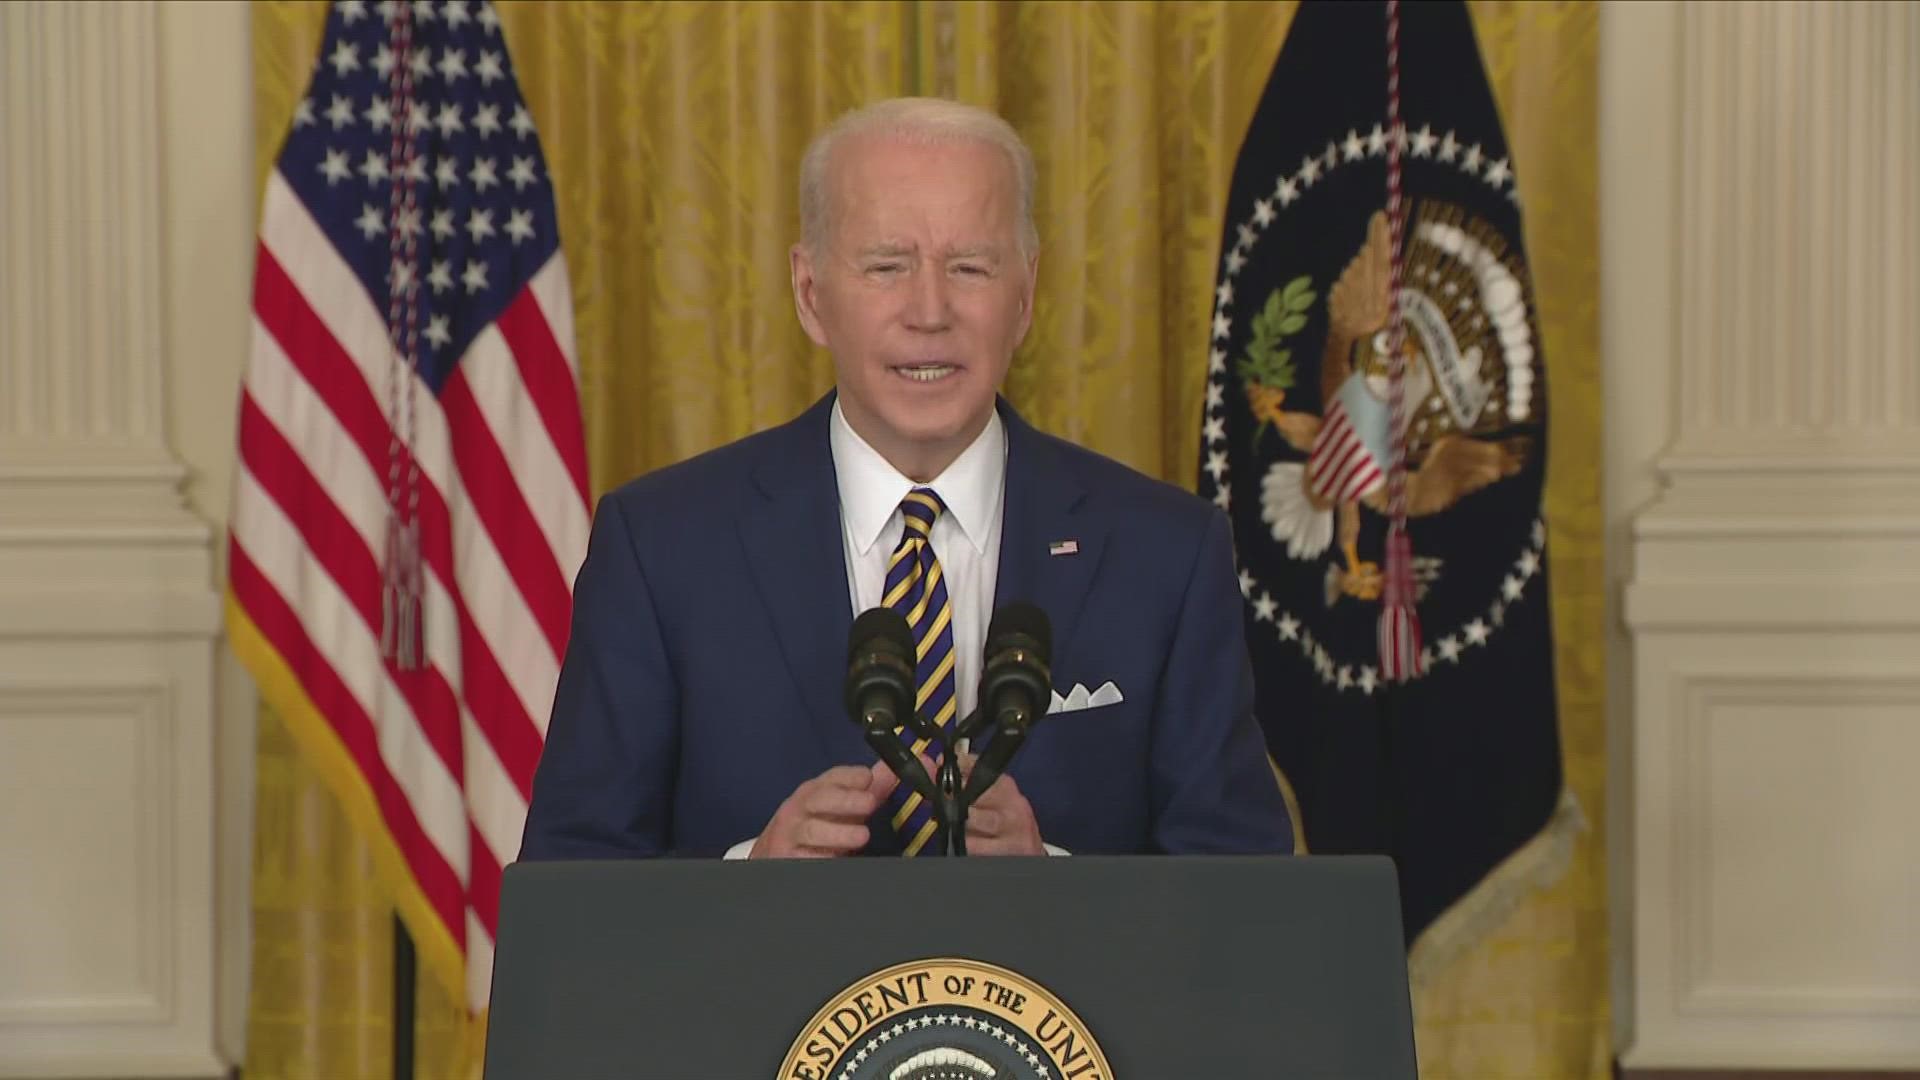 Biden spoke on funding for schools and other measures for education during the pandemic.